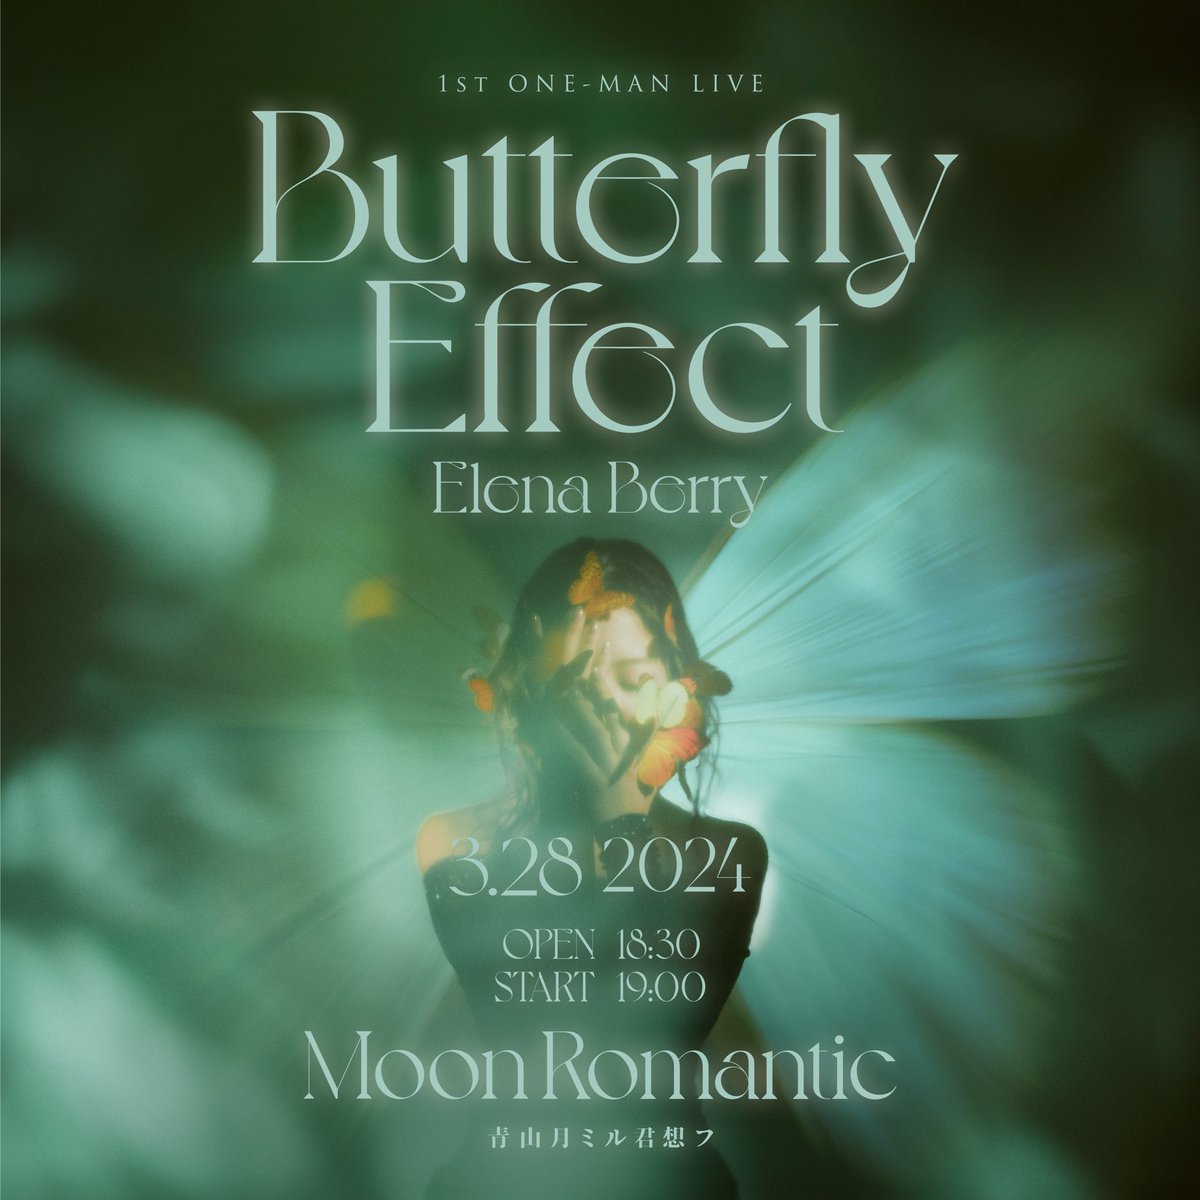 【Butterfly Effect】 1st ONE-MAN LIVEが決定しました！！ 新たな世界への羽ばたきを見届けて...!!🦋🪐✨ DATE >>> 2024.03.28 VENUE >>> 青山月ミル君想フ OPEN >>> 18:30 START >>> 19:00 TICKET >>> tiget.net/events/298387